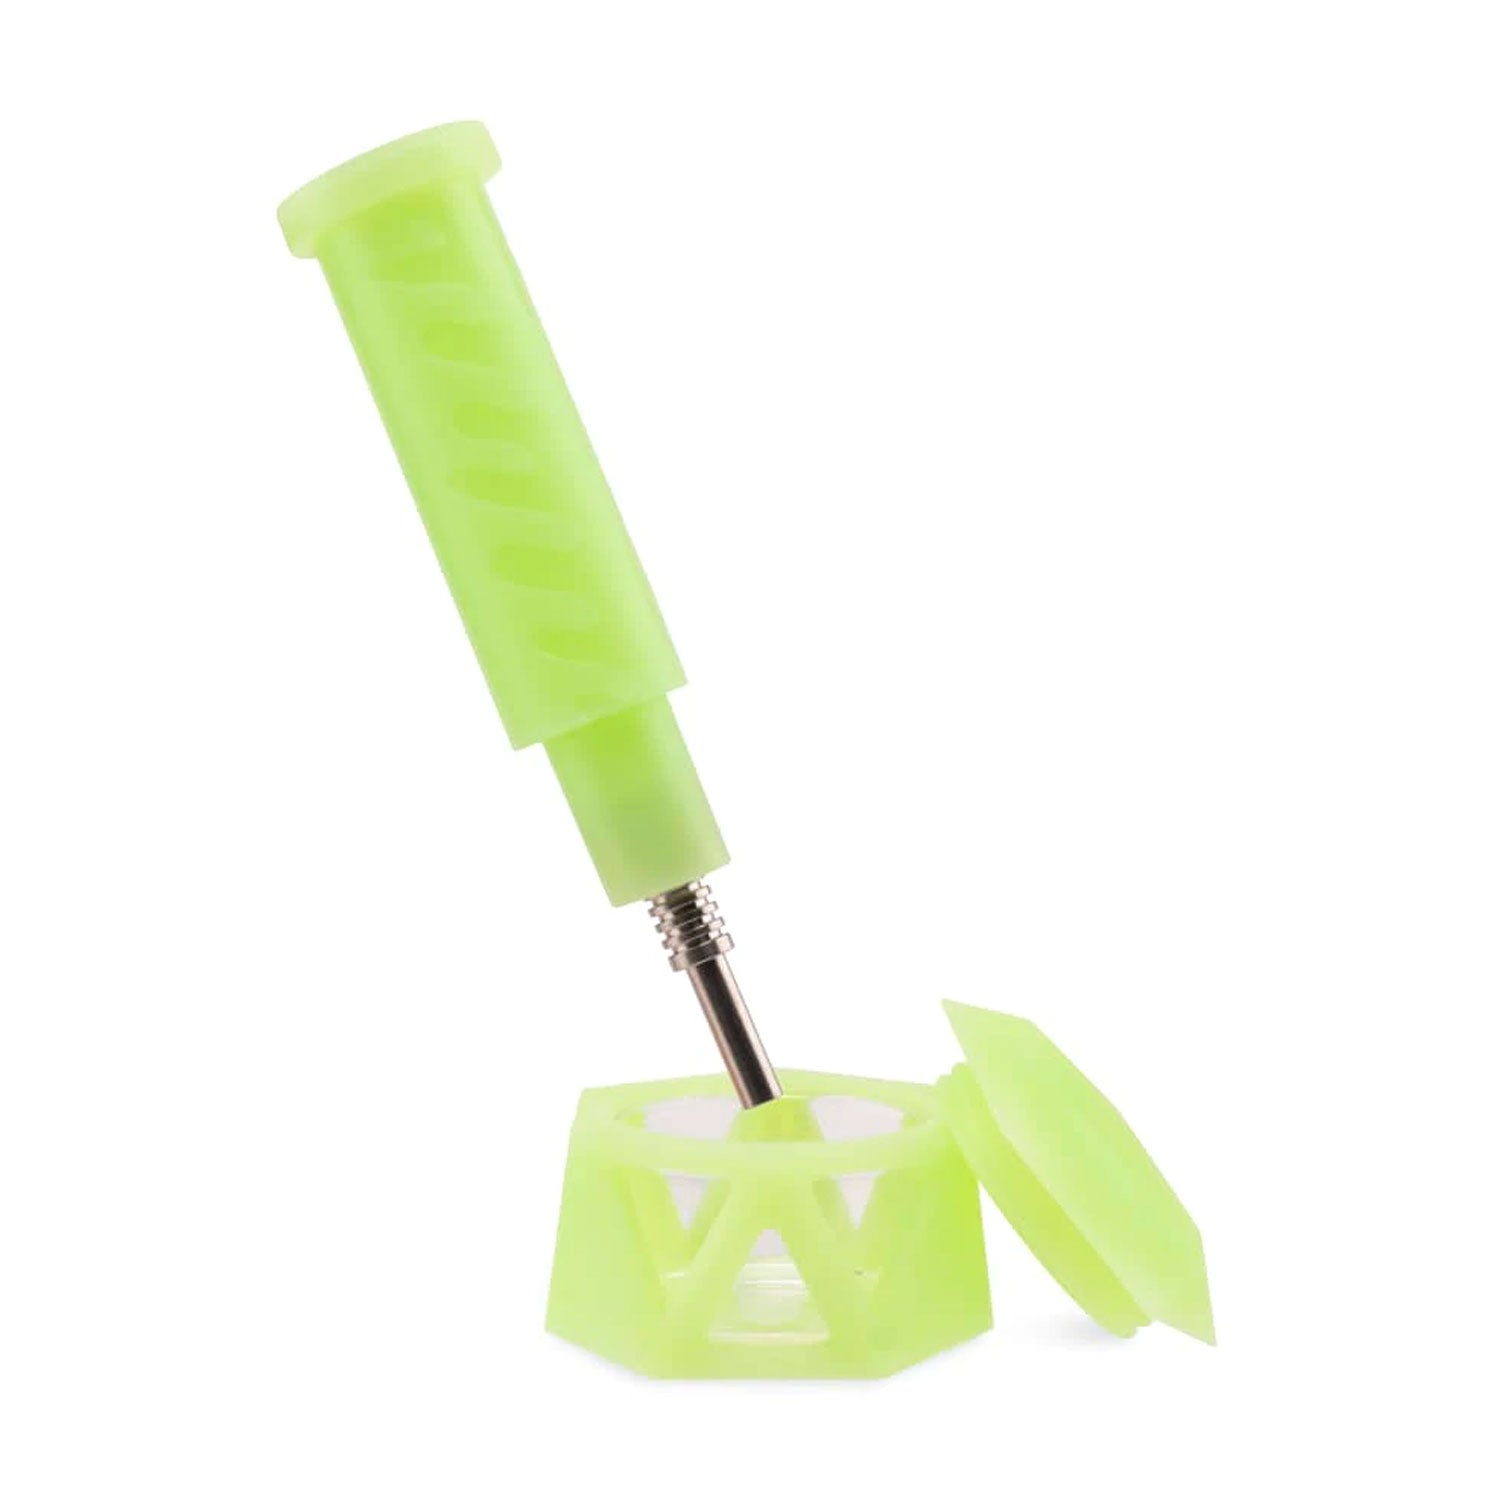 Ooze Hyborg Silicone Glass 4-in-1 Hybrid Water Pipe and Dab Straw